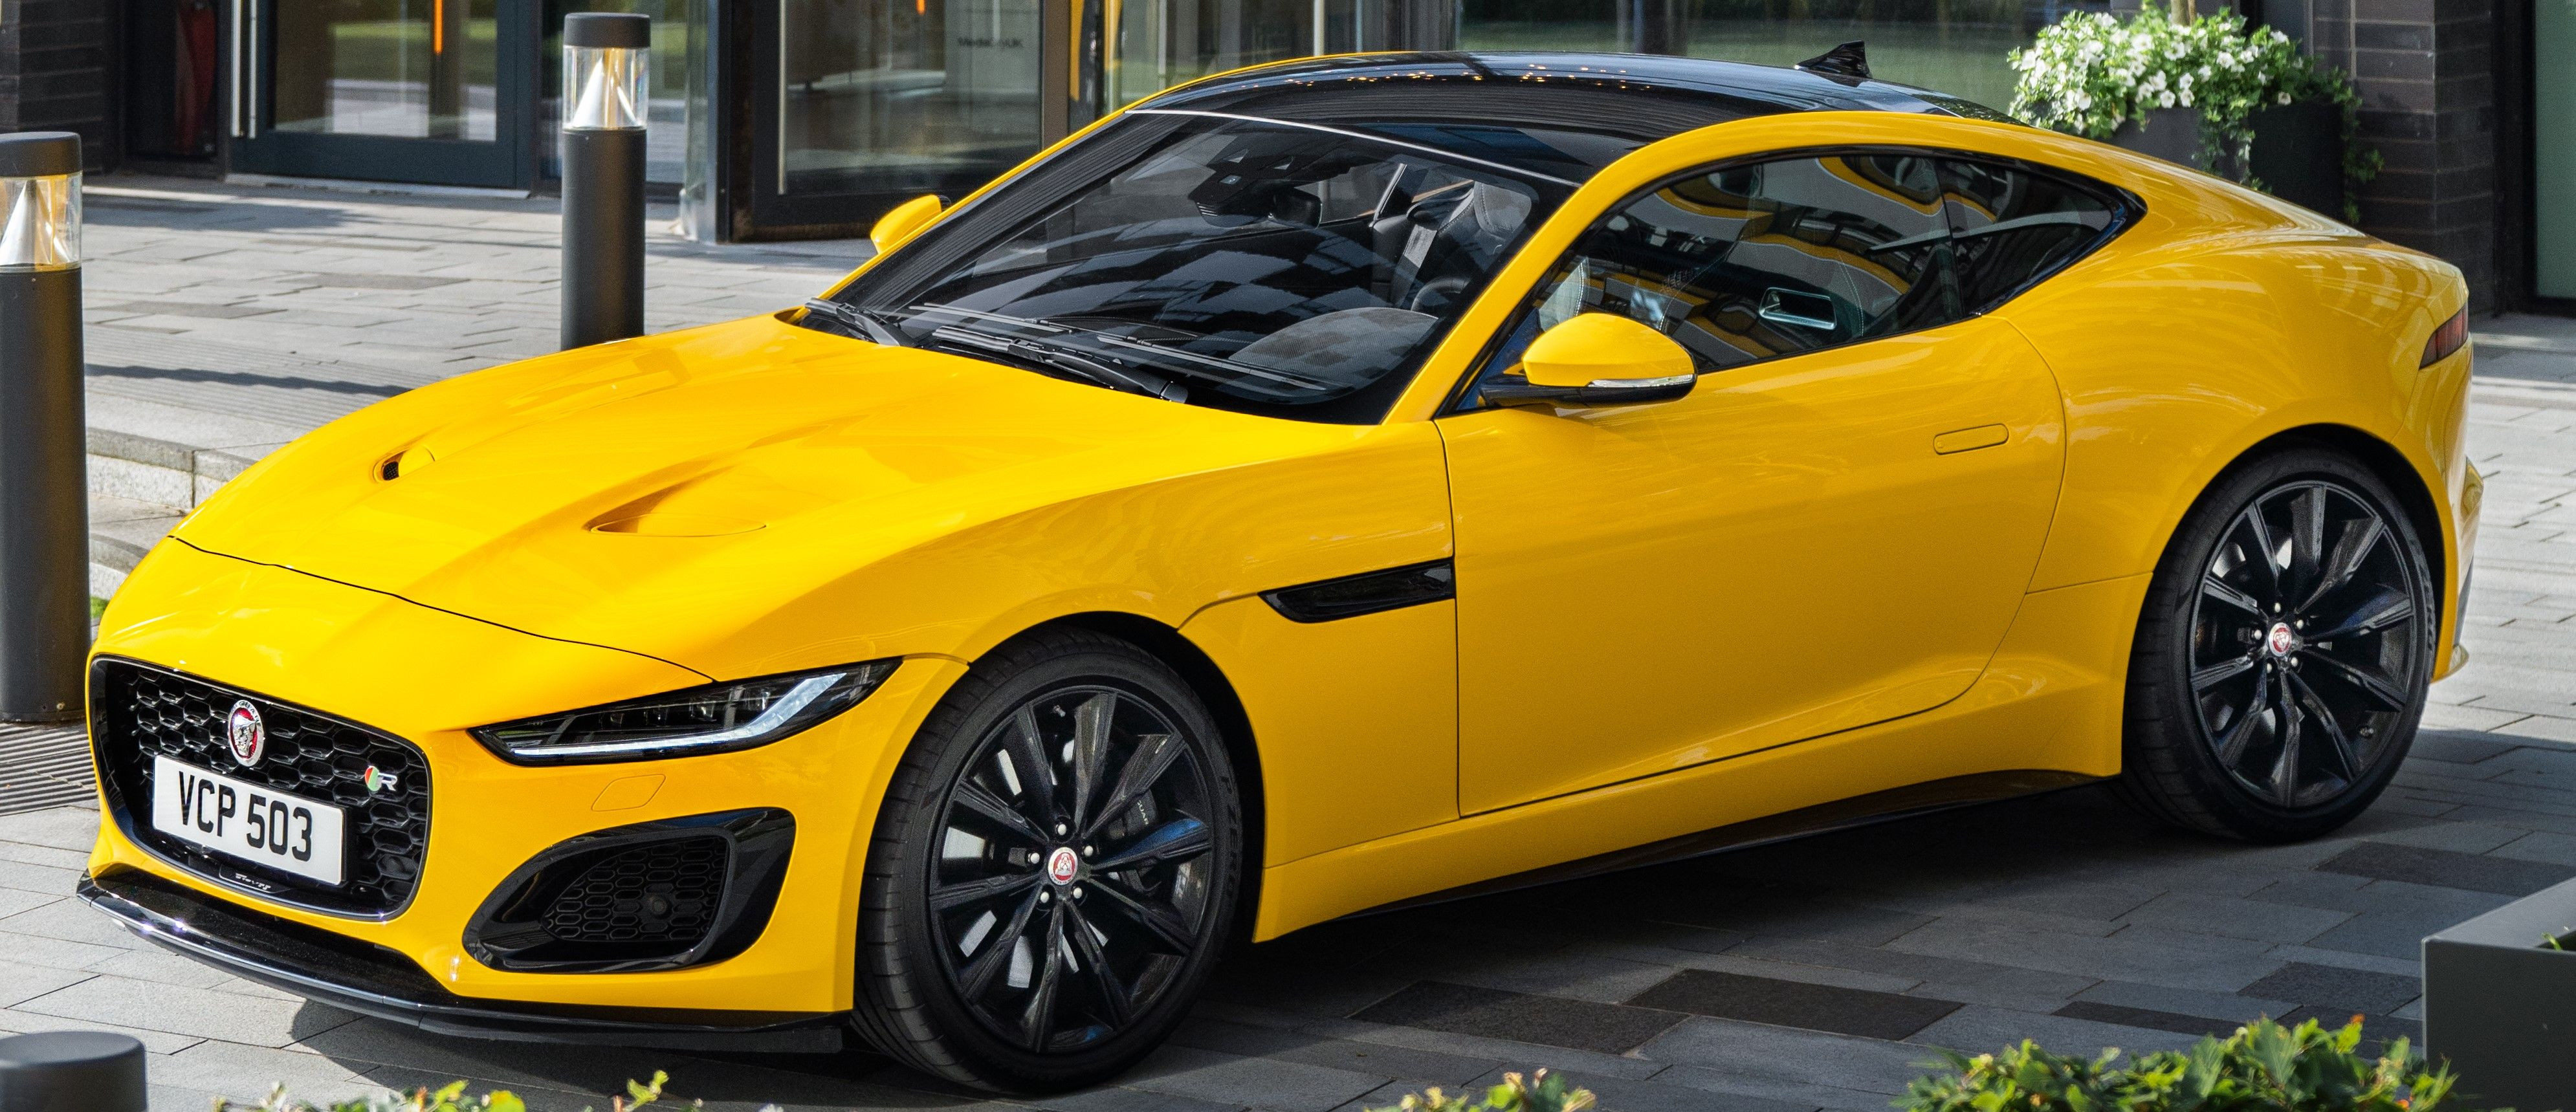 Yellow 2022 Jaguar F-Type Coupe parked outdoors